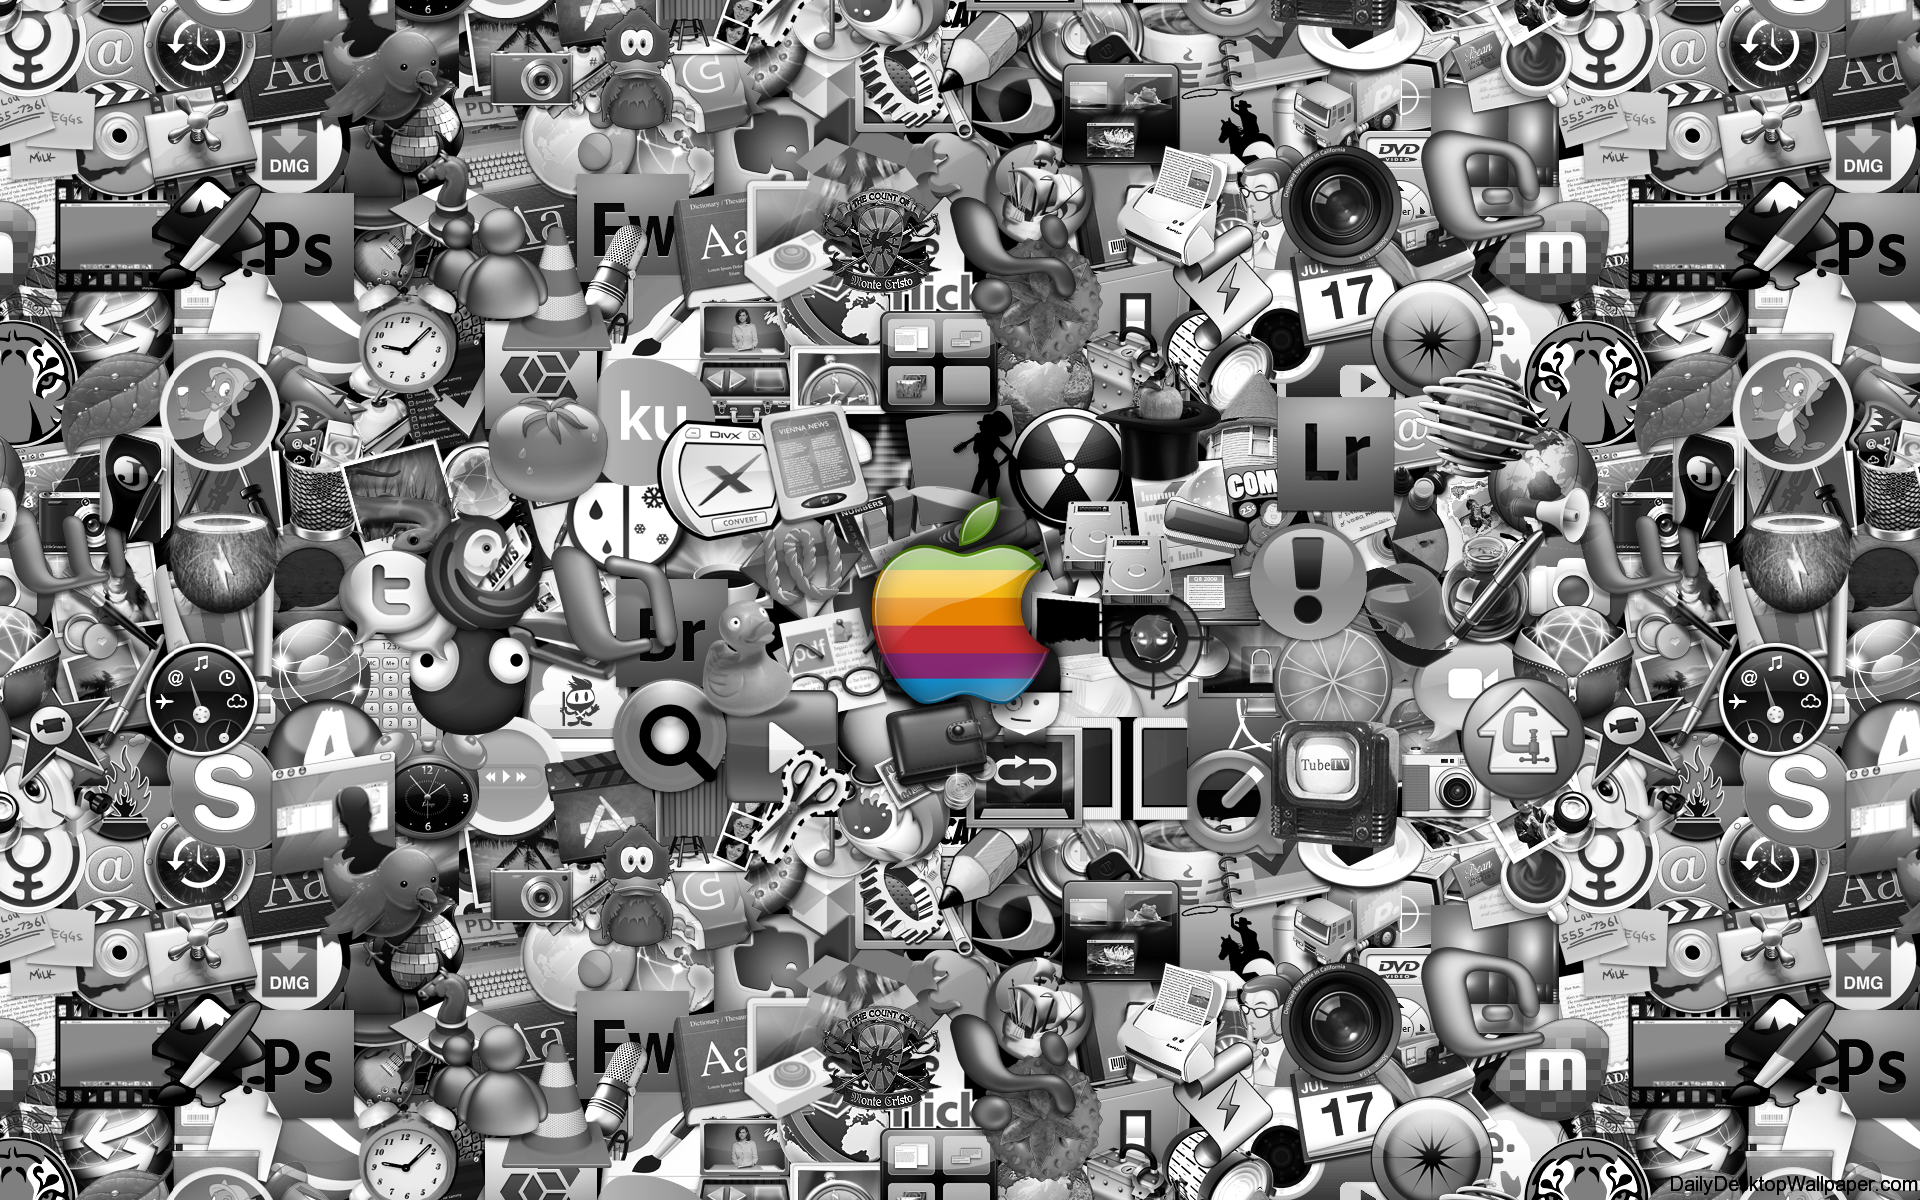 Apple and Logos - HD Wallpapers